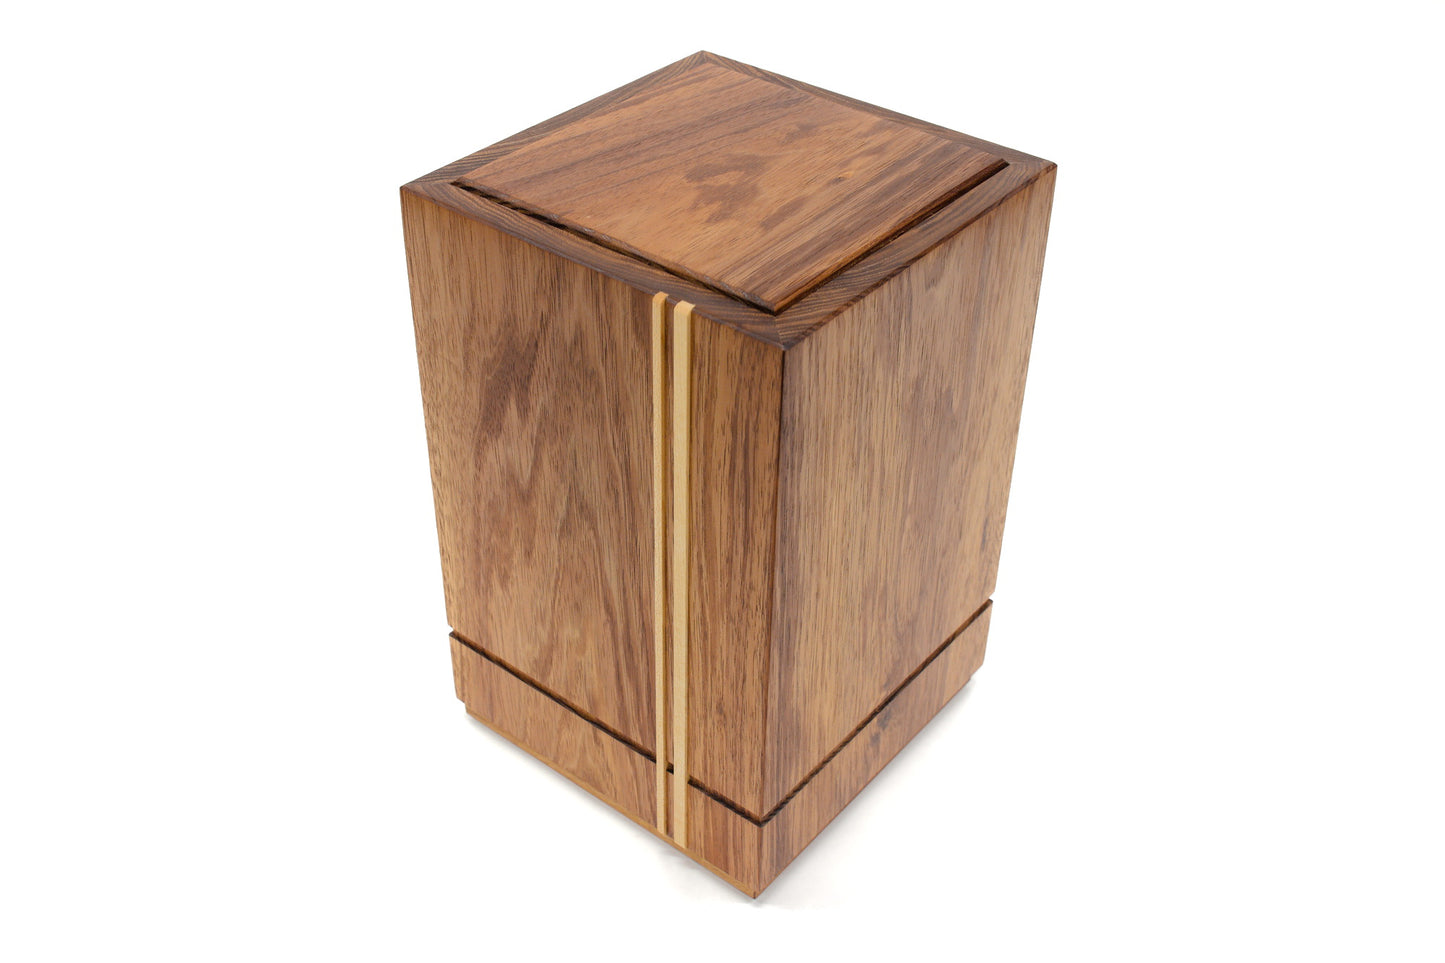 Wooden cremation urn handcrafted from Tasmanian Blackwood